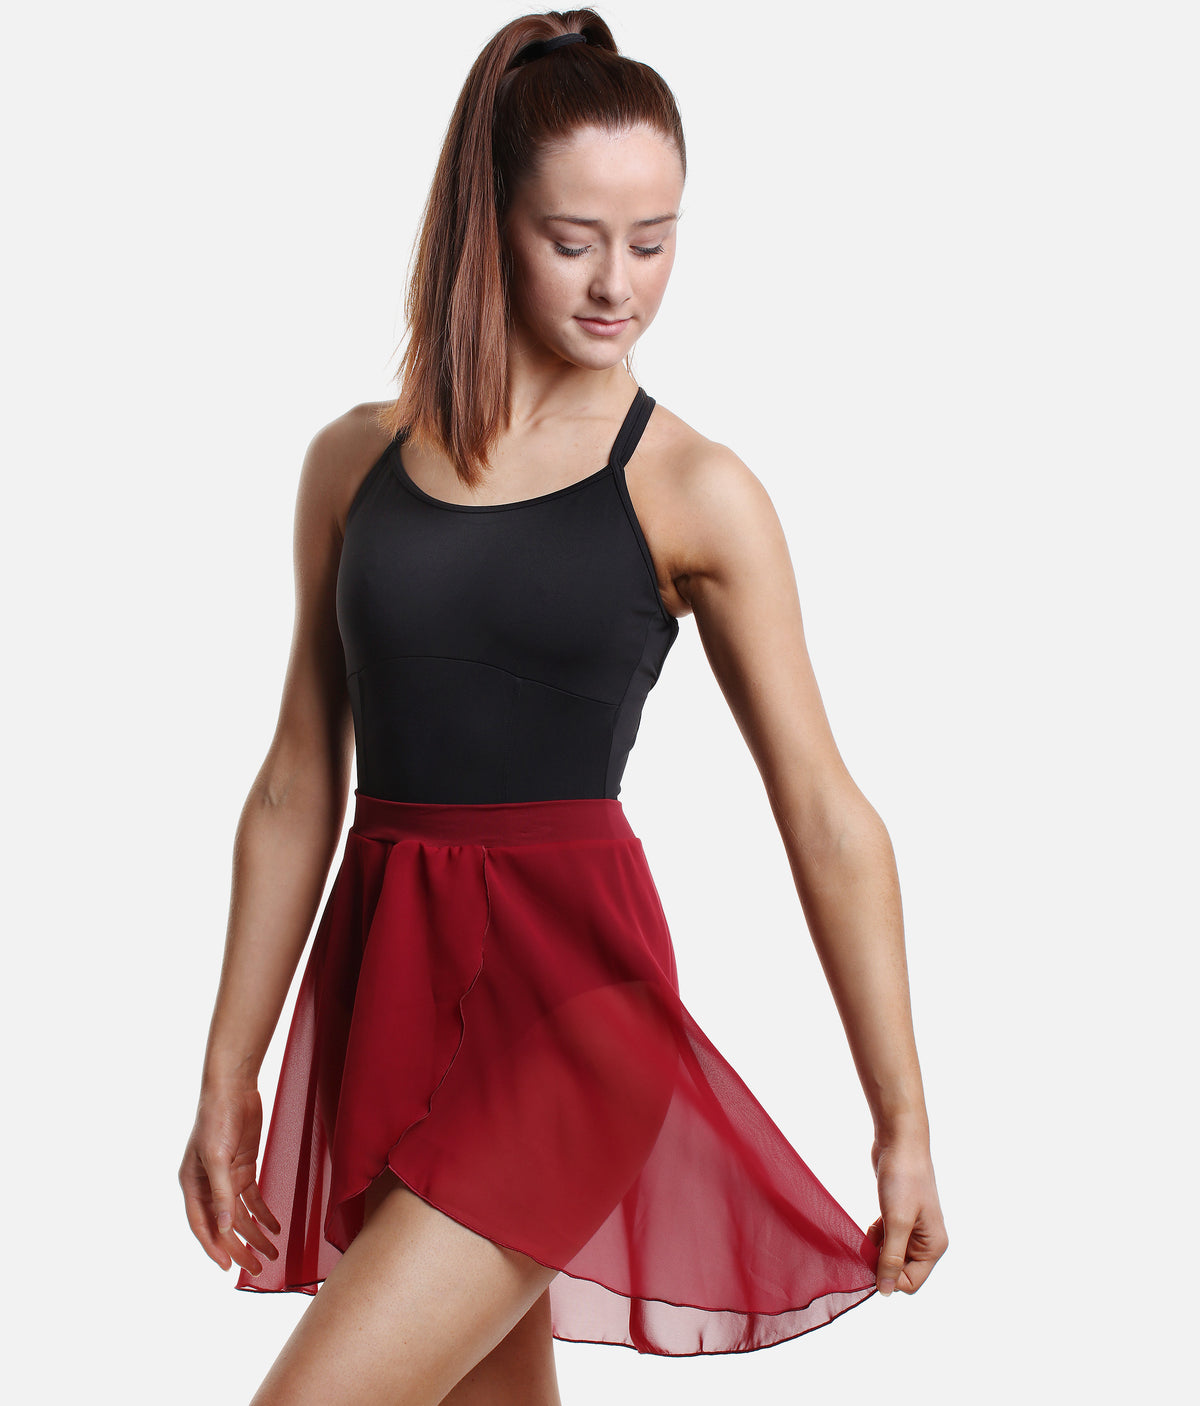 Tutus For Women | Tutu Dresses For Adults For Sale | Ballet Dance Skirts In  Capezio